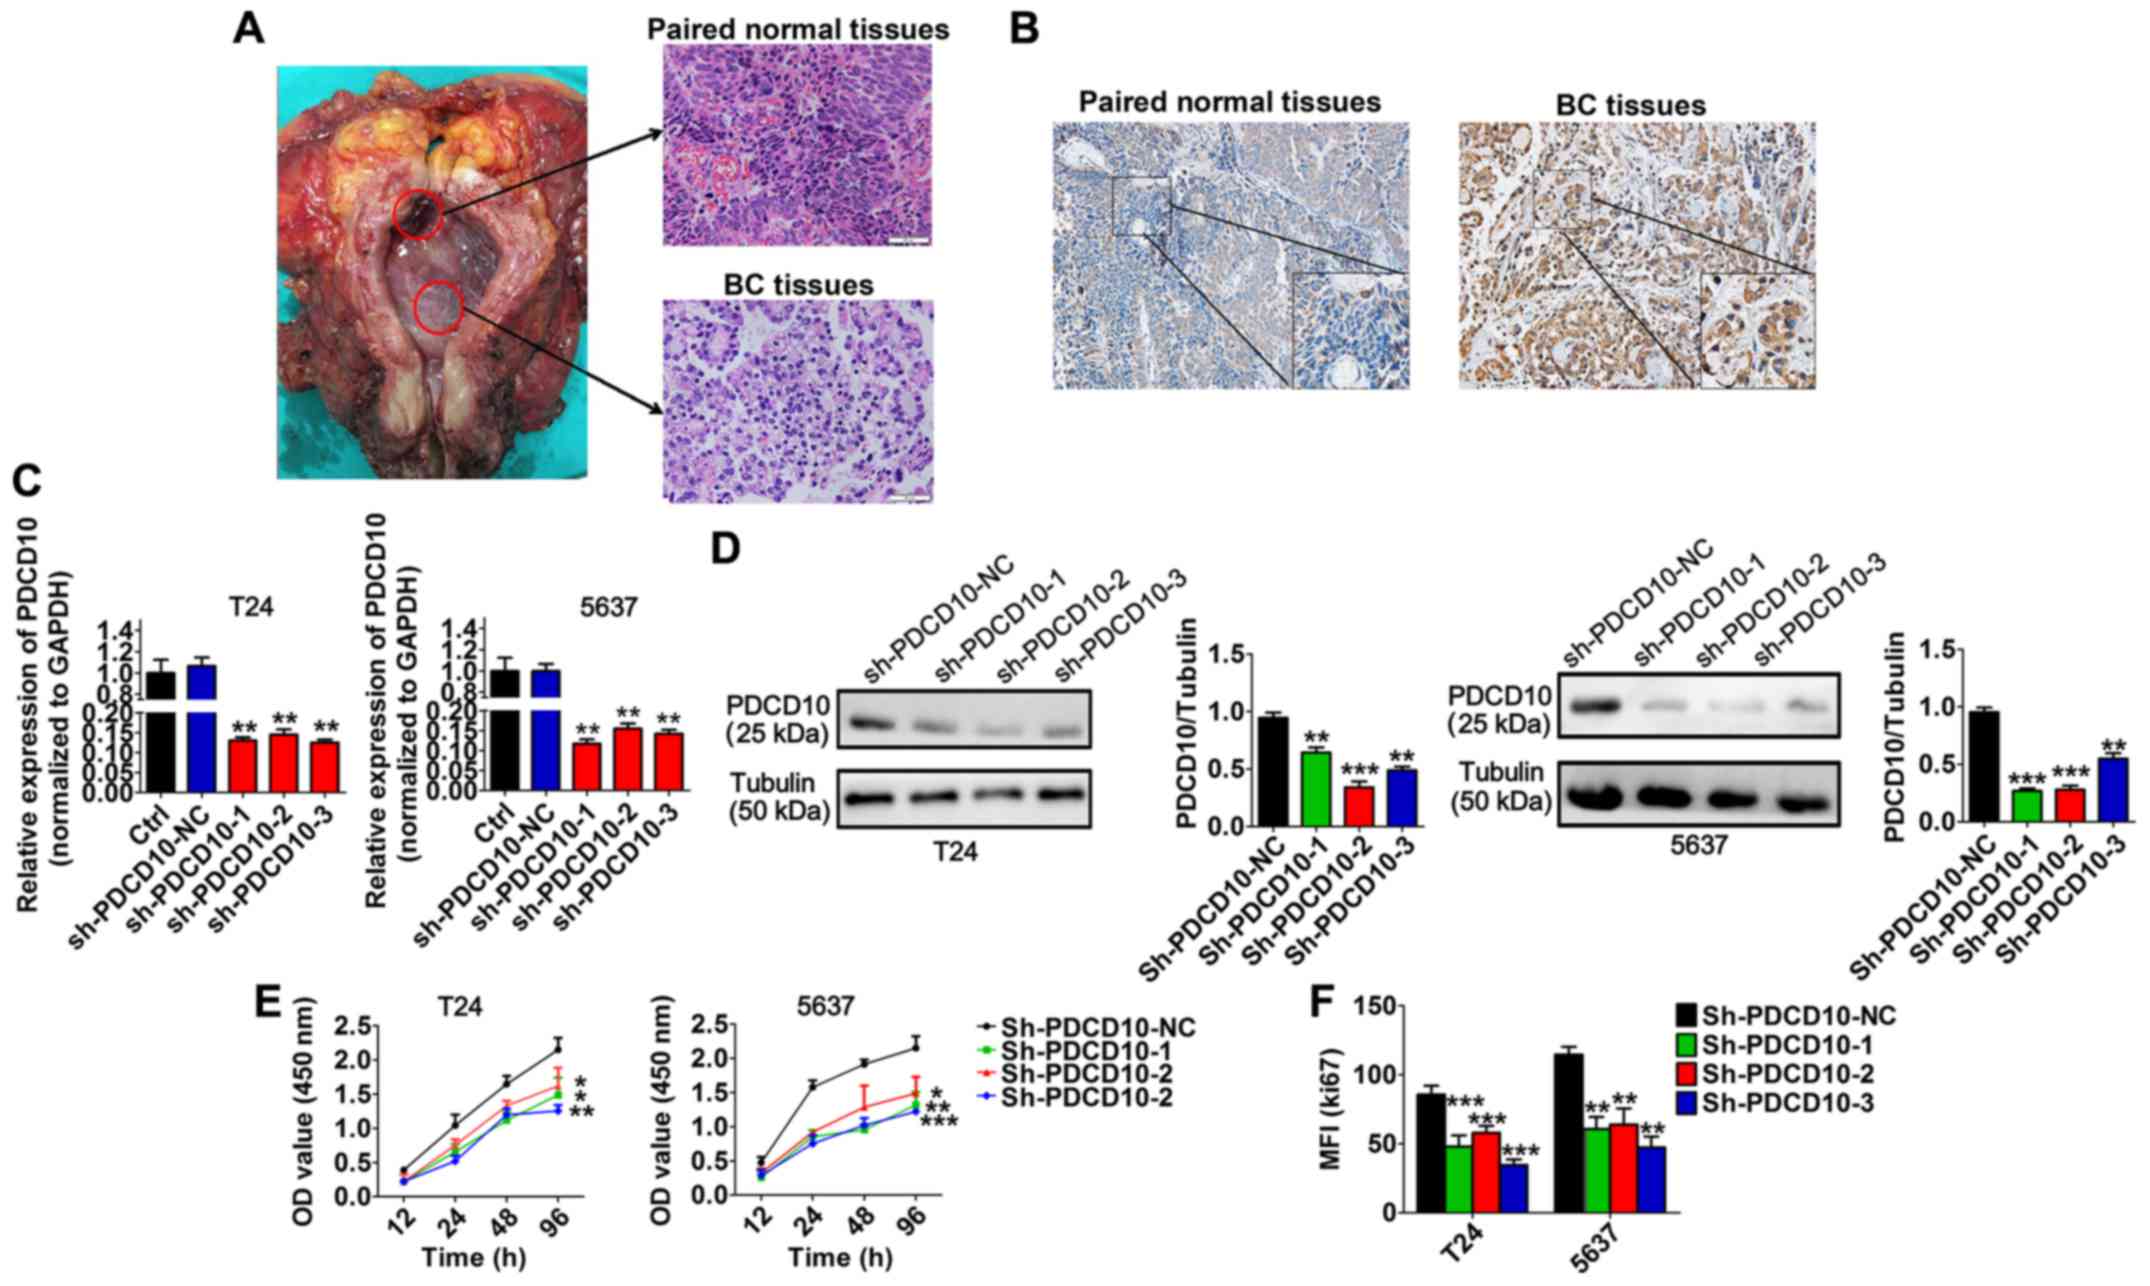 MicroRNA-155 promotes bladder cancer growth by repressing 